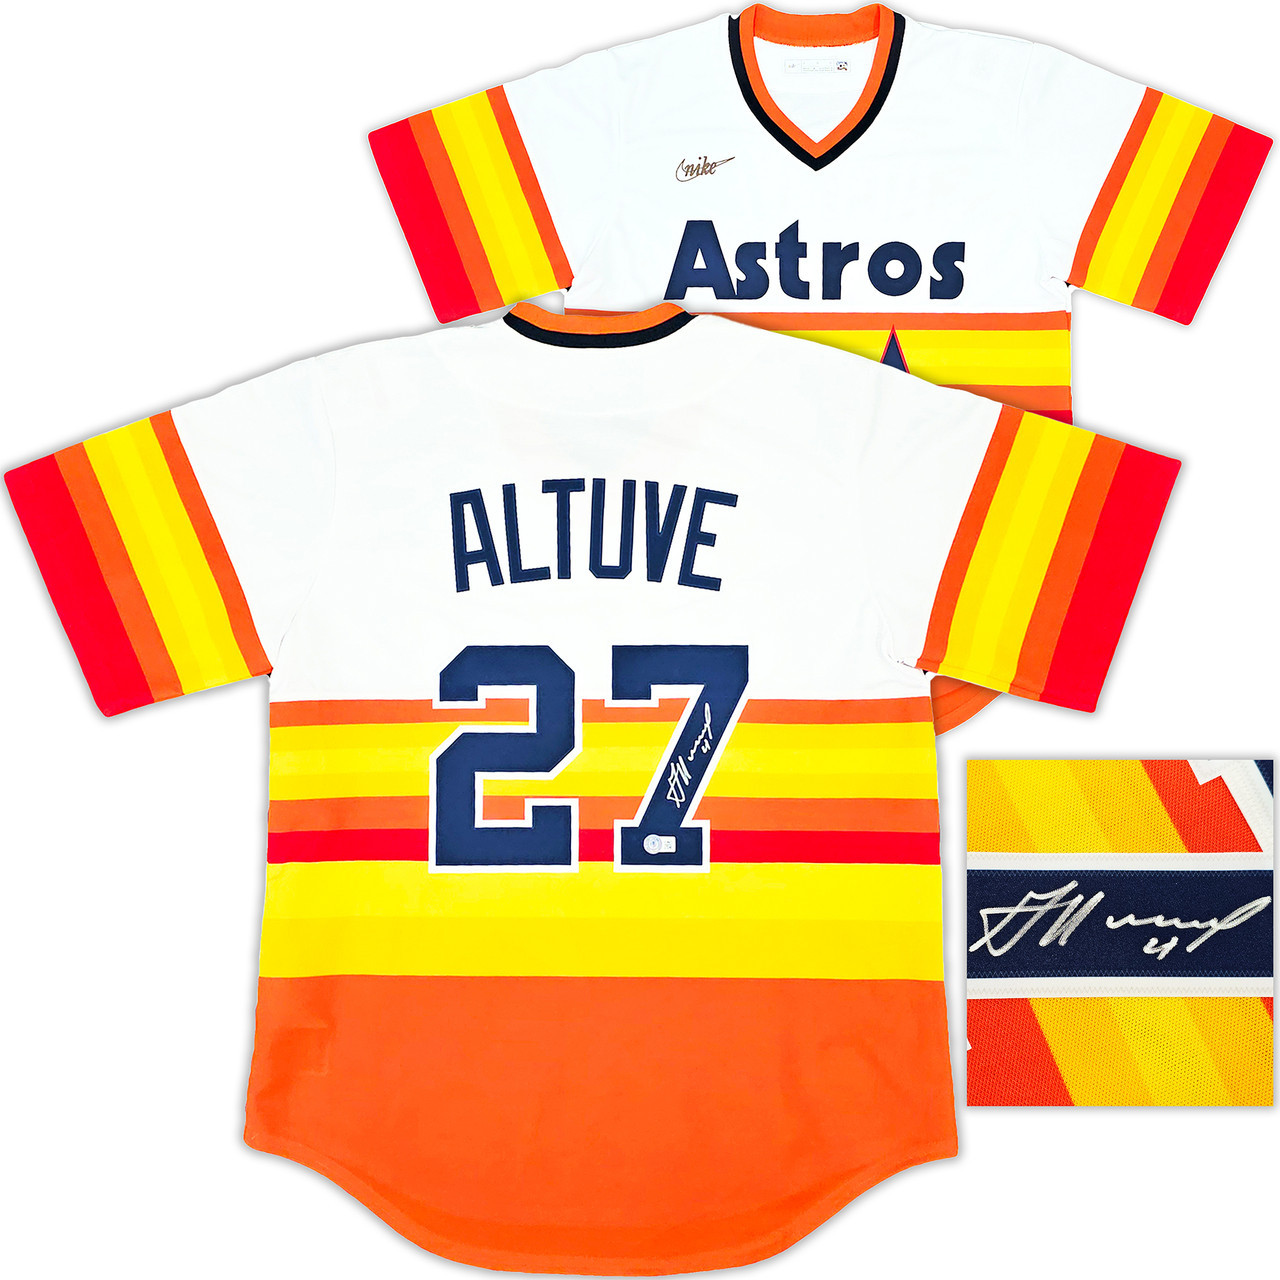 astros white throwback jersey